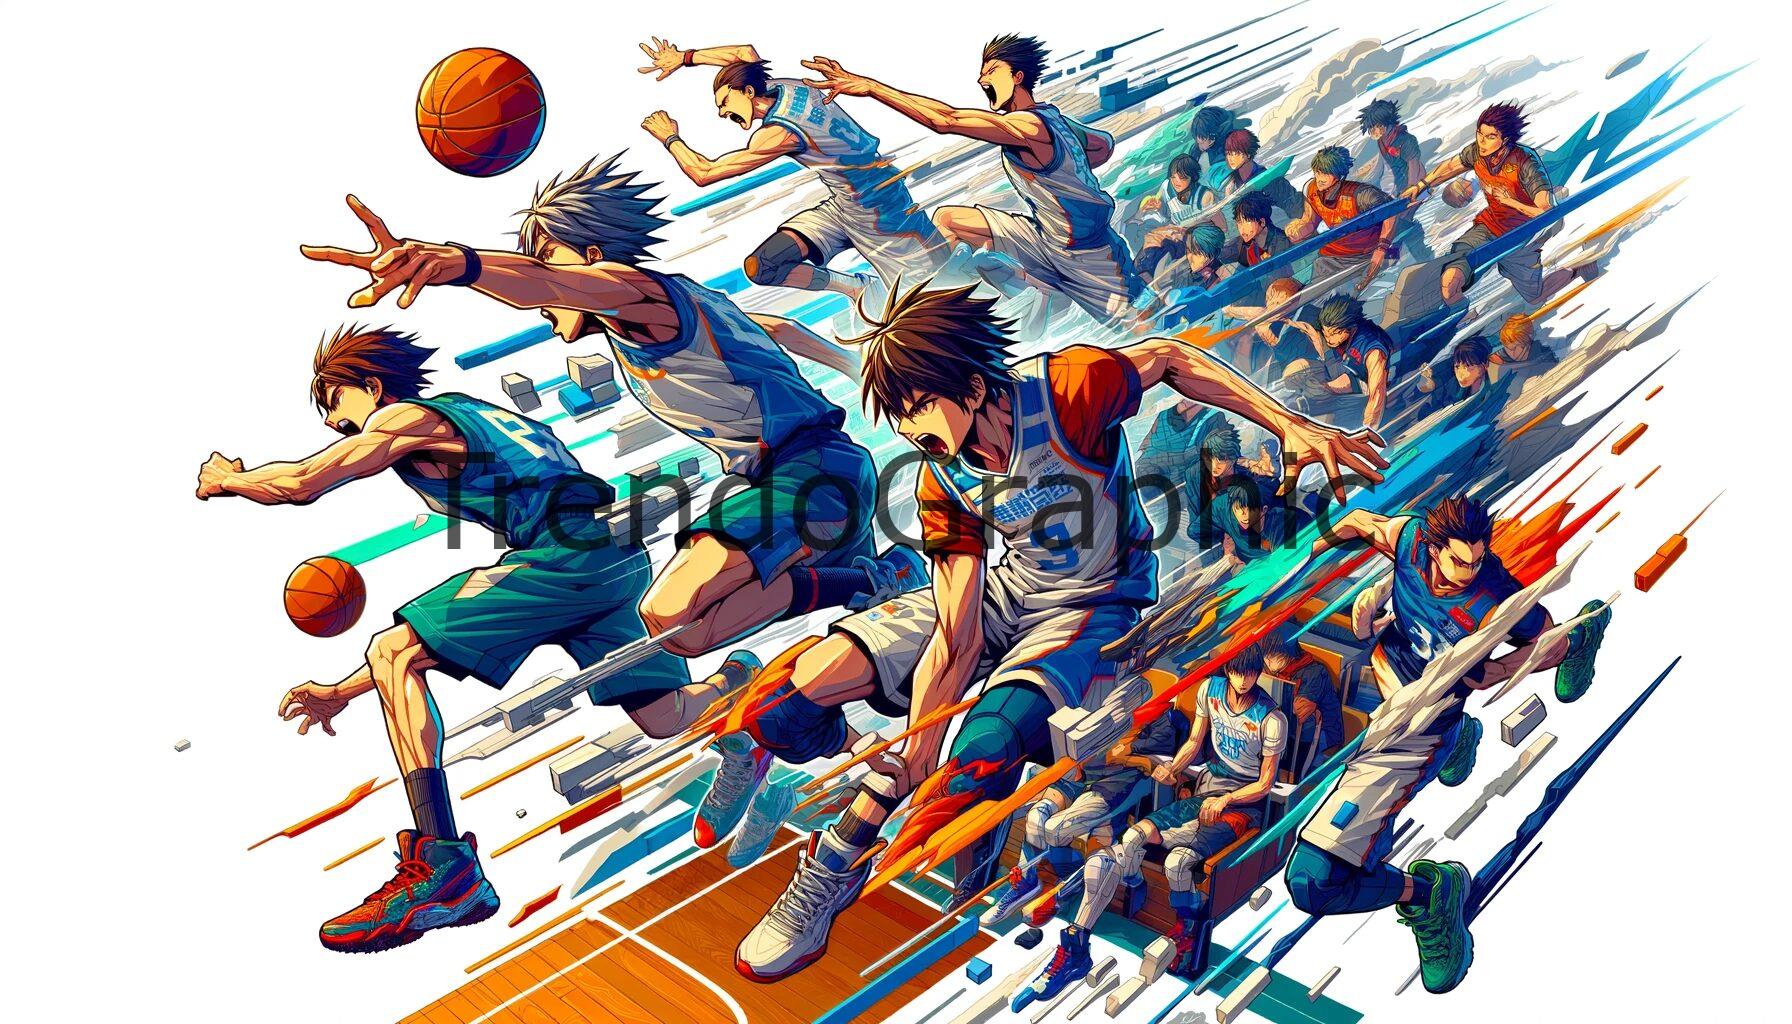 Thrilling Anime Sports Battle: A Moment of High Tension